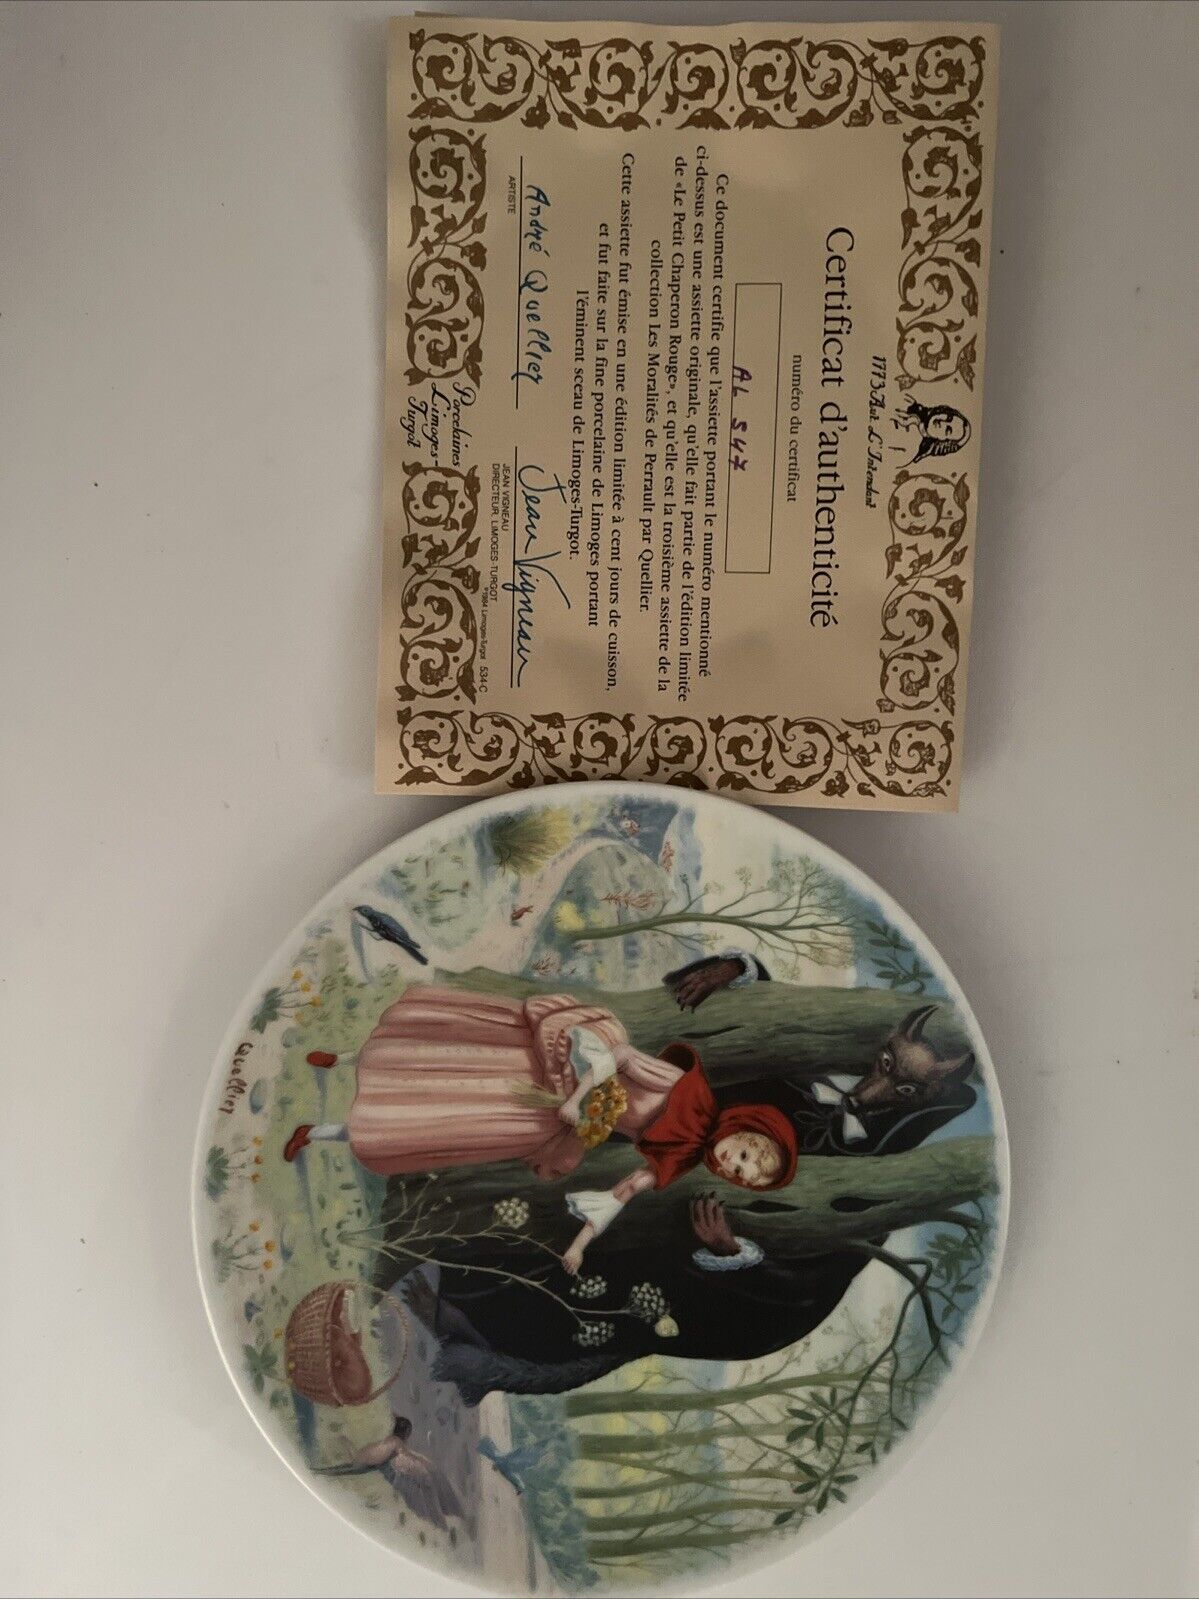 Vintage Collector Plate “Le Petite Chaperon Rouge” With Cert Of Authentication